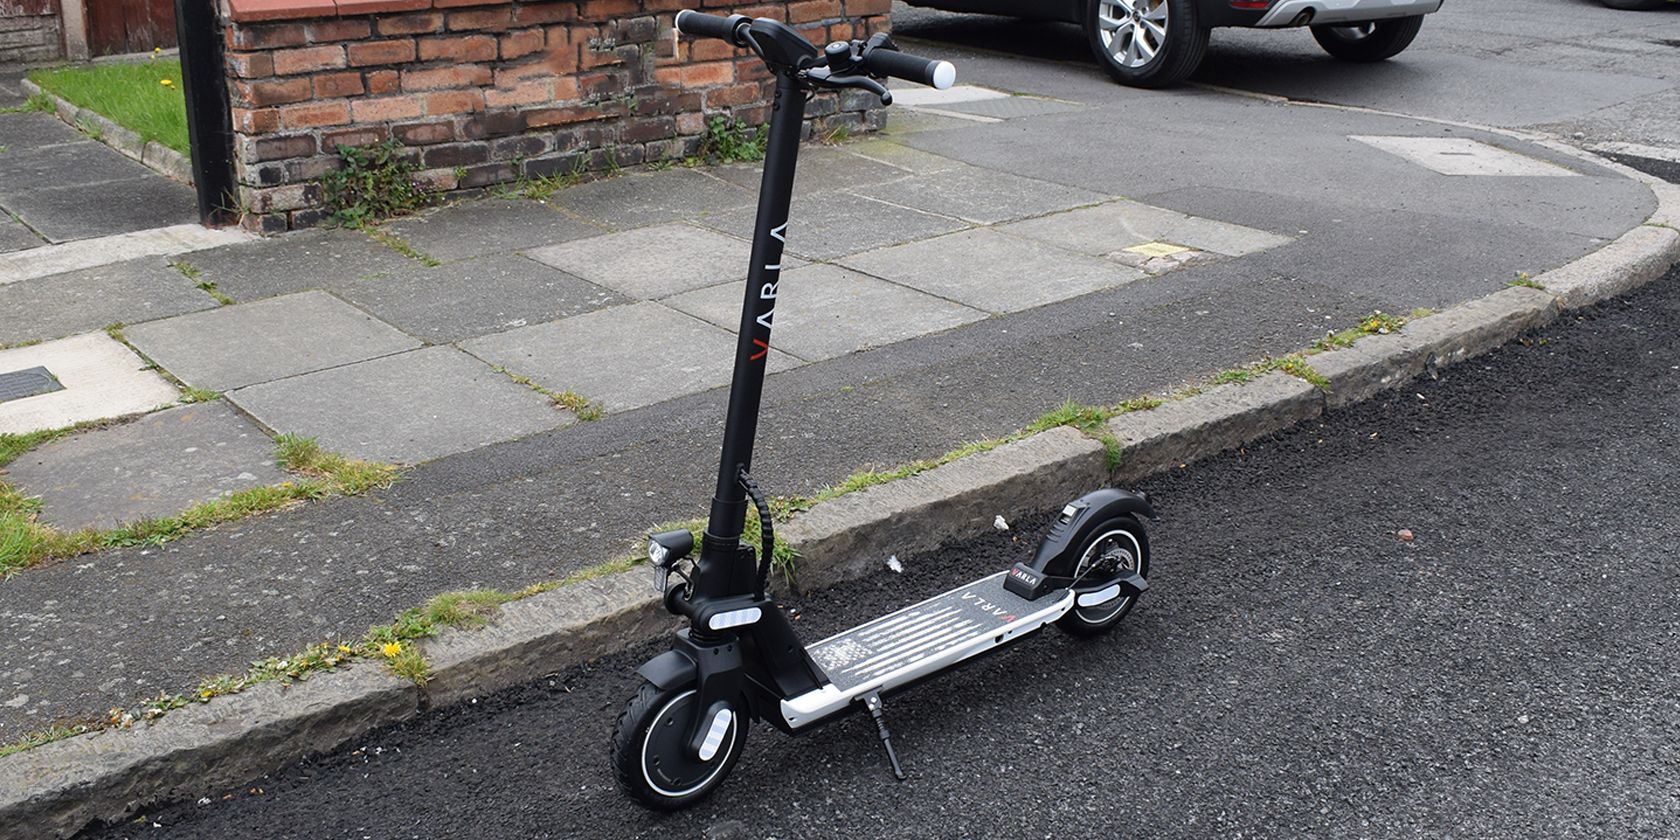 Varla Wasp electric scooter standing up on road